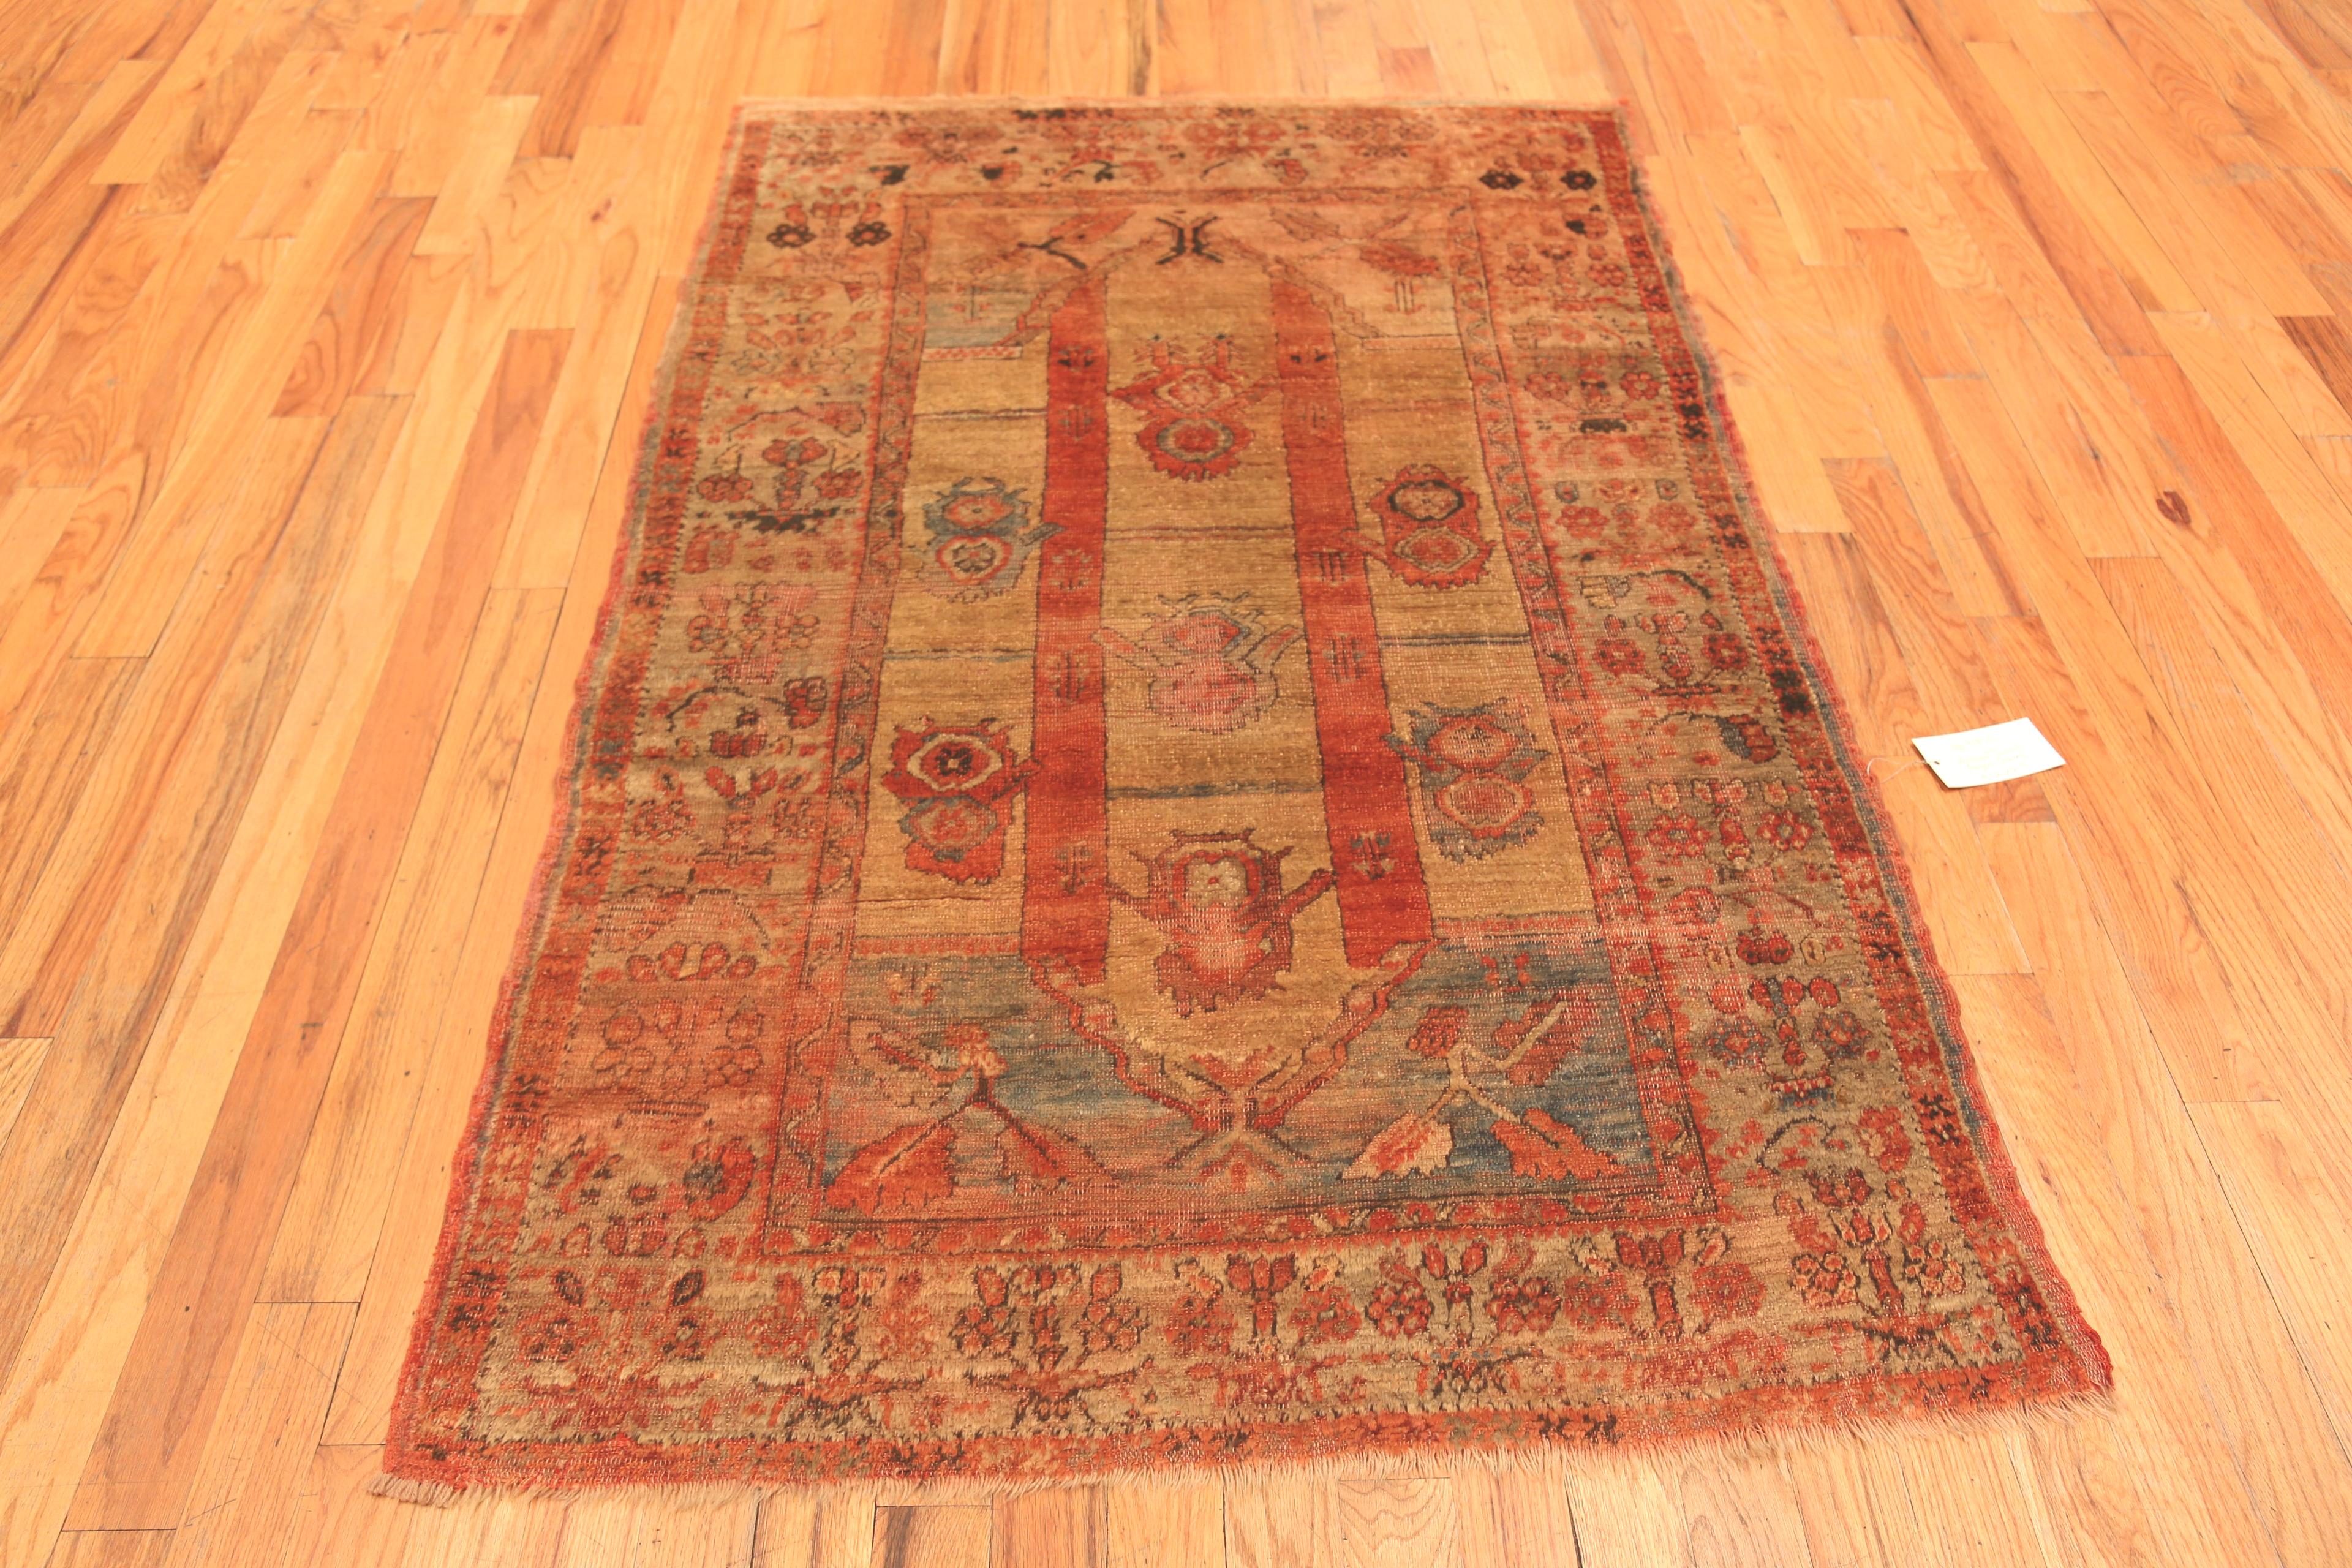 Antique Turkish Angora Oushak Rug, Country of origin: Turkish rugs, Circa date: 1900. Size: 4 ft 2 in x 6 ft 9 in (1.27 m x 2.05 m)
 